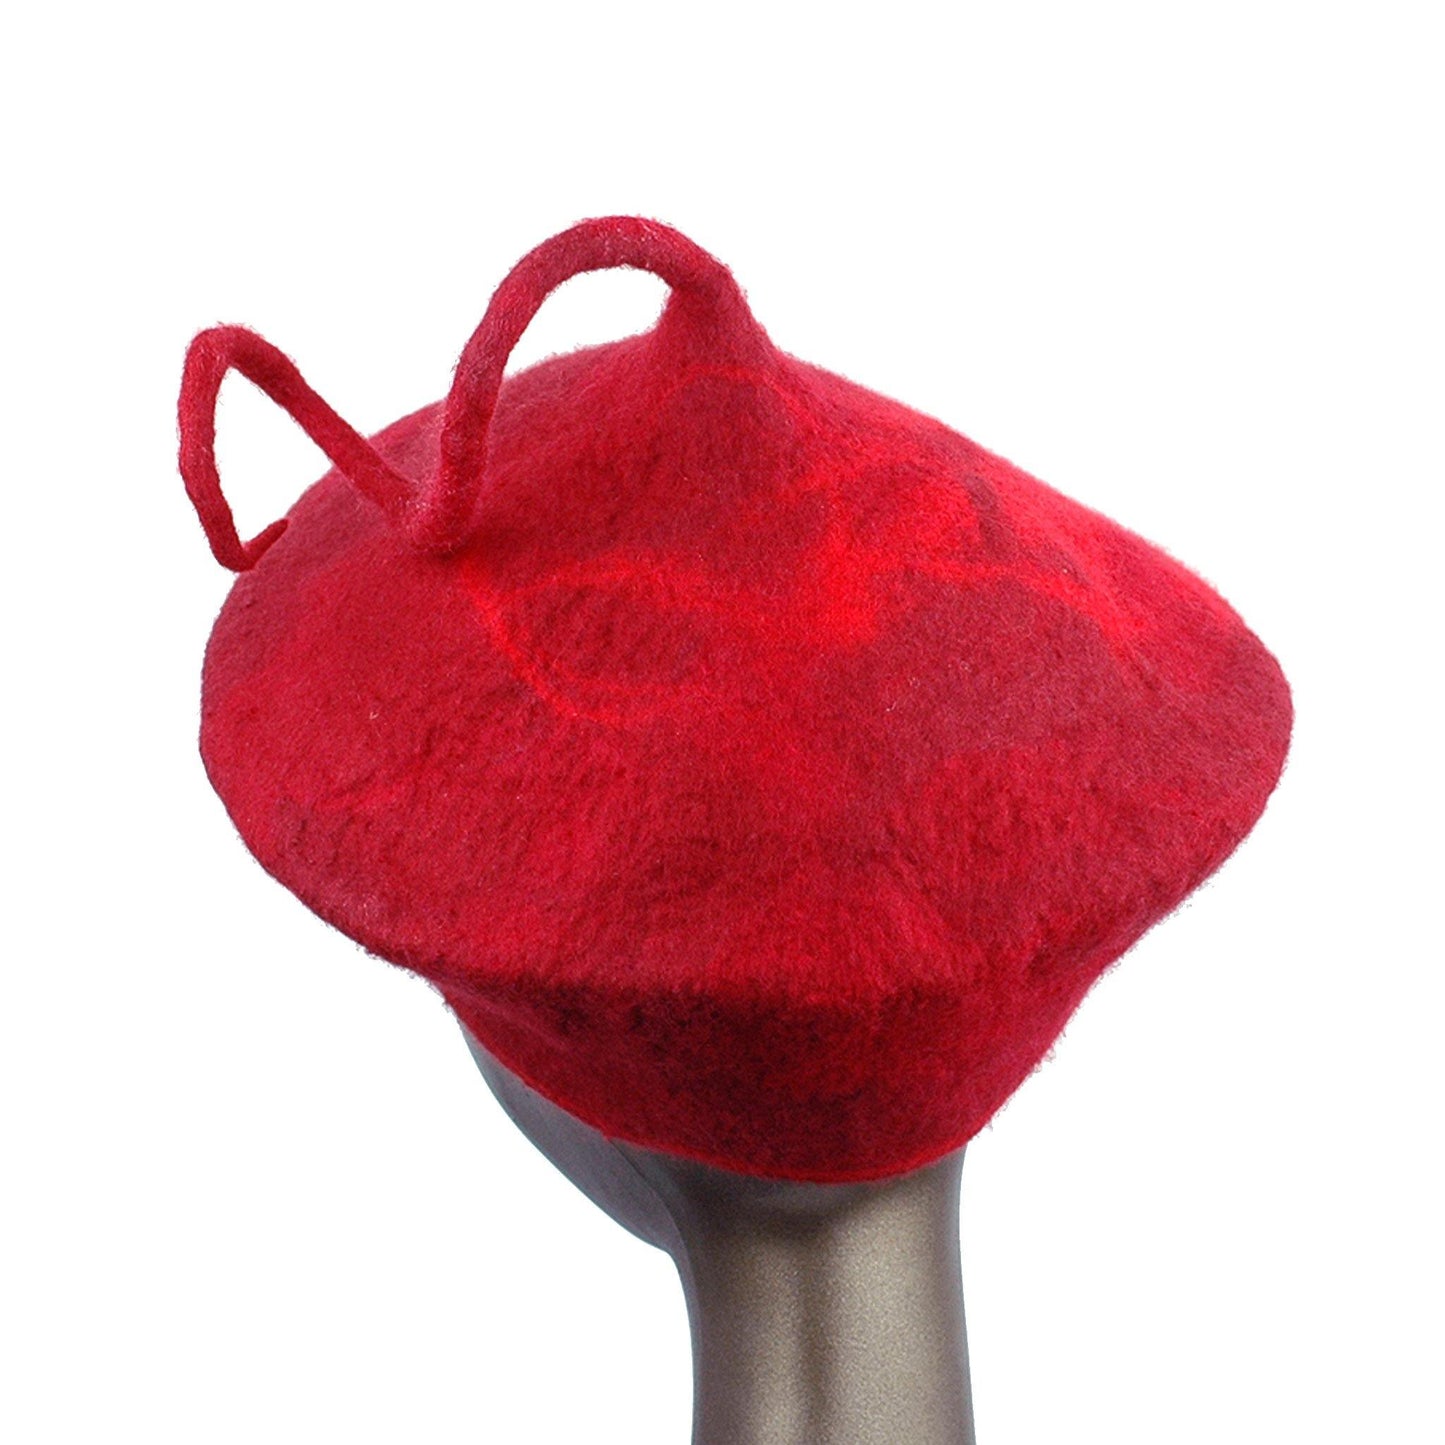 Custom Red Beret with Medium Curlicue - back view